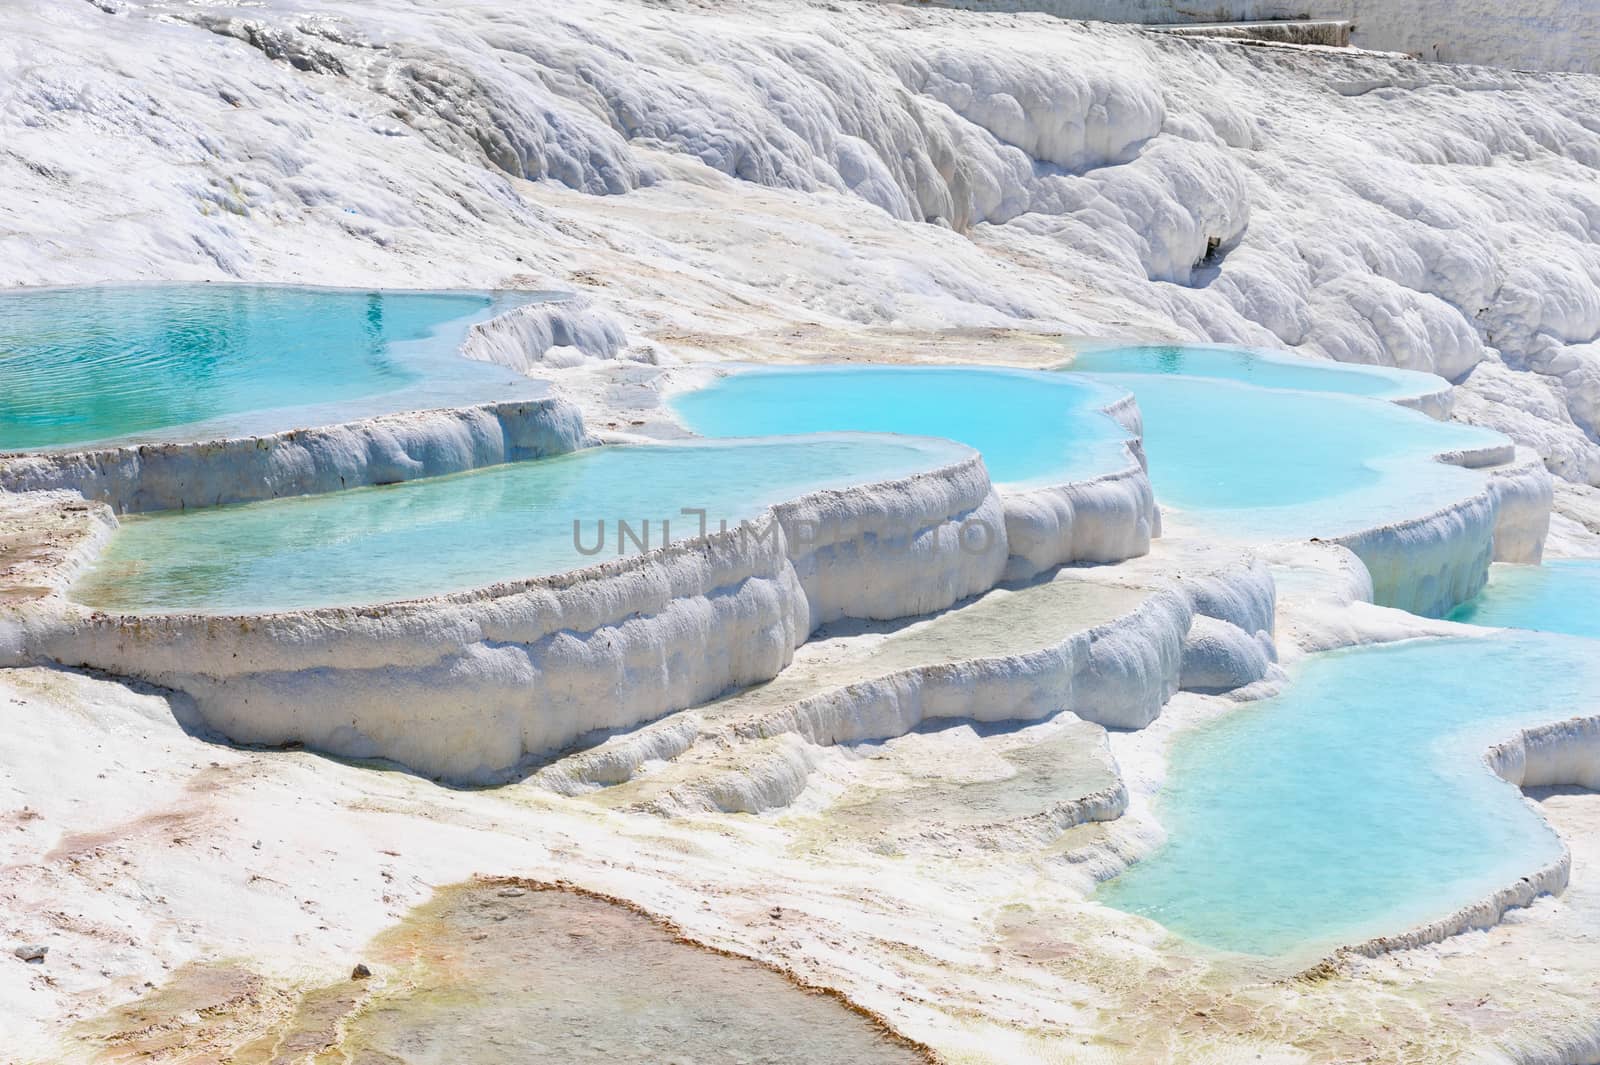 Travertine pools and terraces in Pamukkale, Turkey by starush